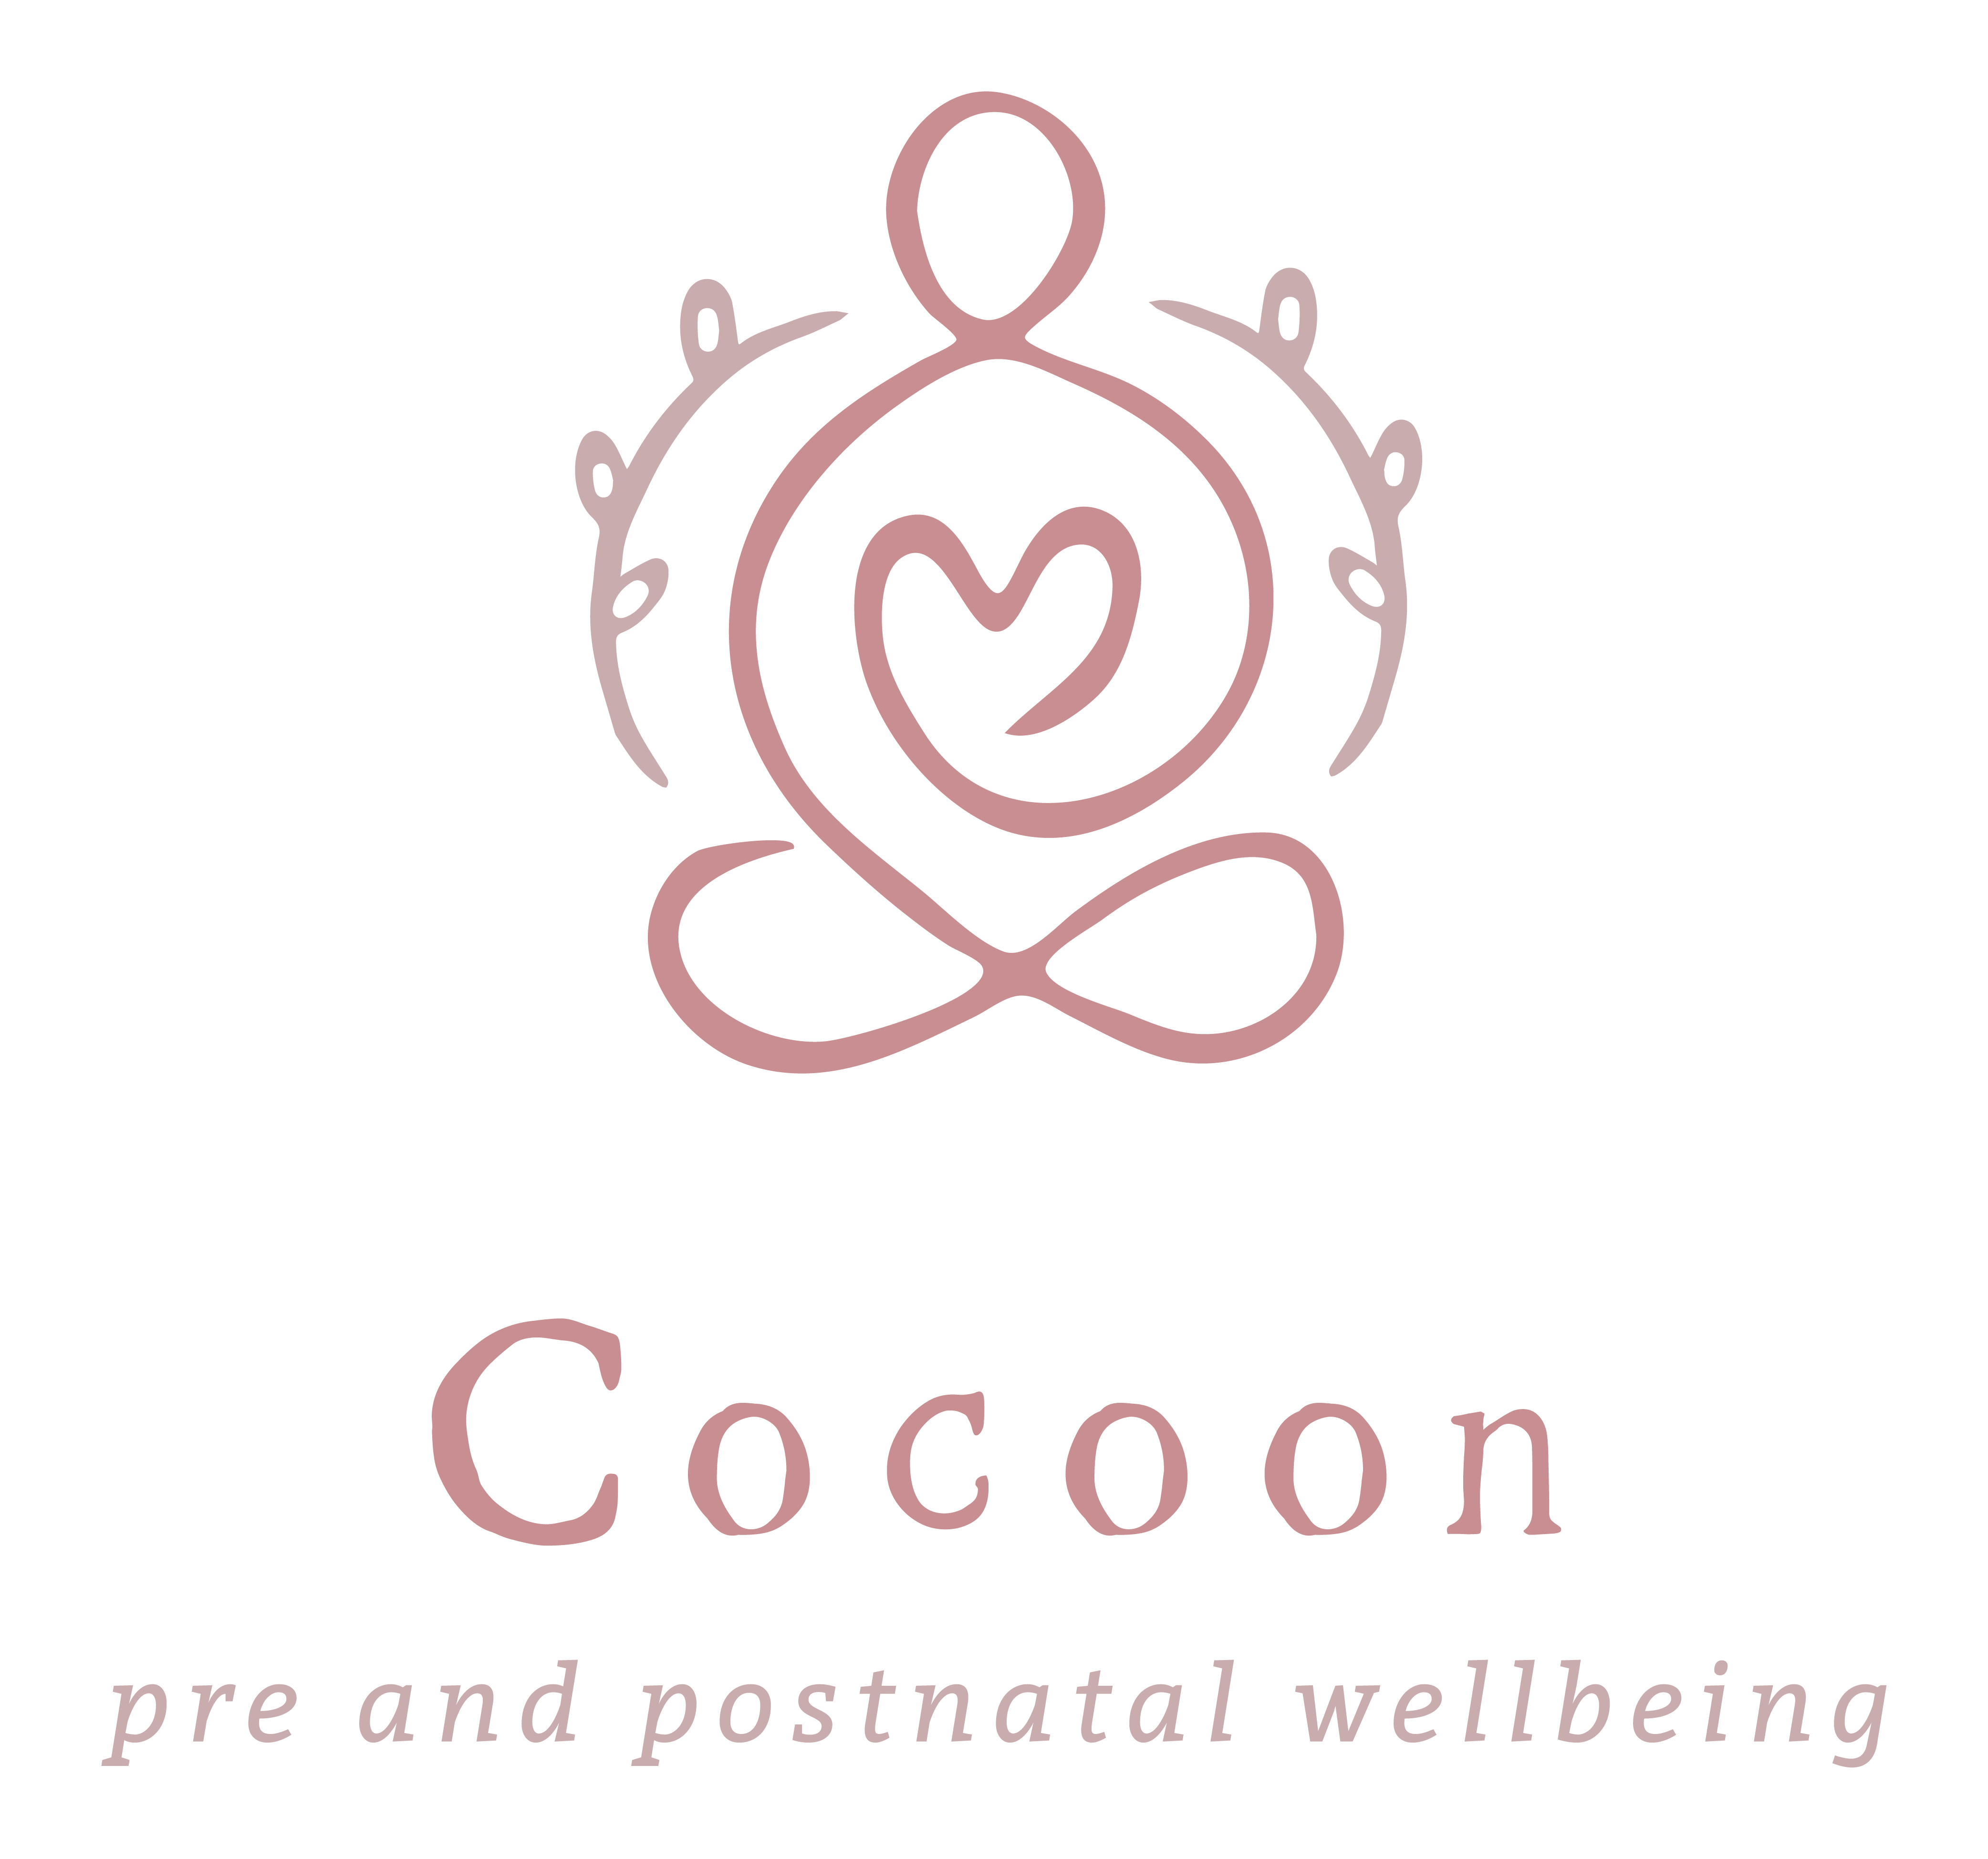 Cocoon Pre and Postnatal Wellbeing's logo